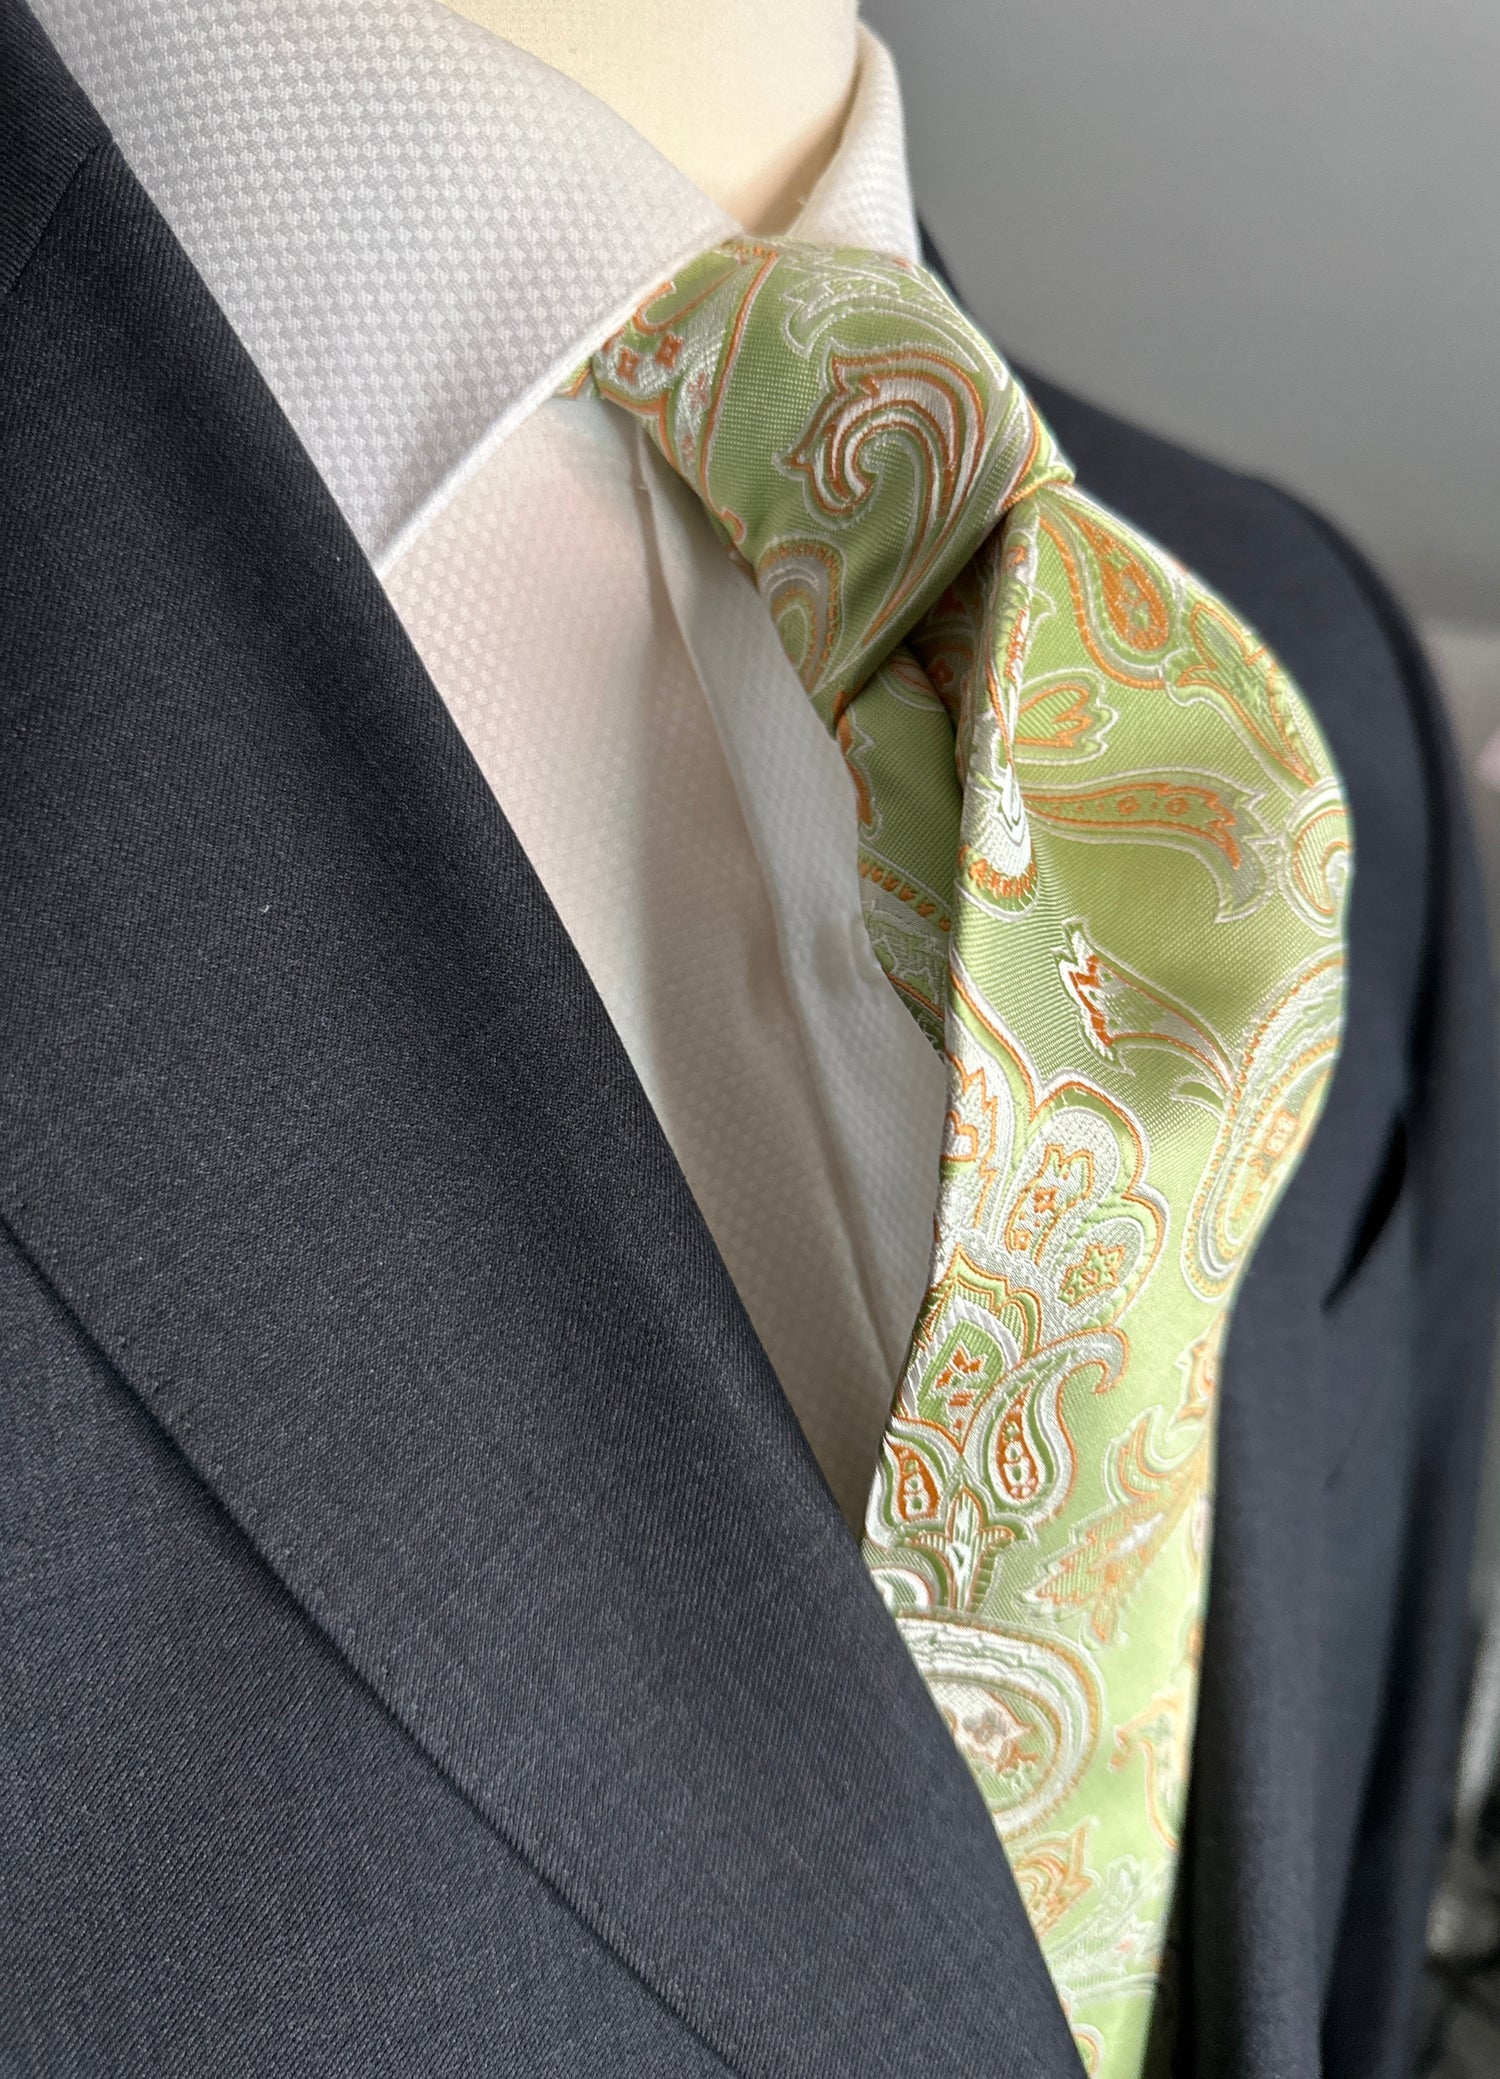 This 100% silk woven tie has a beautiful large paisley pattern in pale orange and beige on a pale green background. Great to use with light colorations in shirts and clothing for spring summer occasions. Suits in light blue, olive green, and summer tan will go best with this tie. Don't forget about the navy blazer.